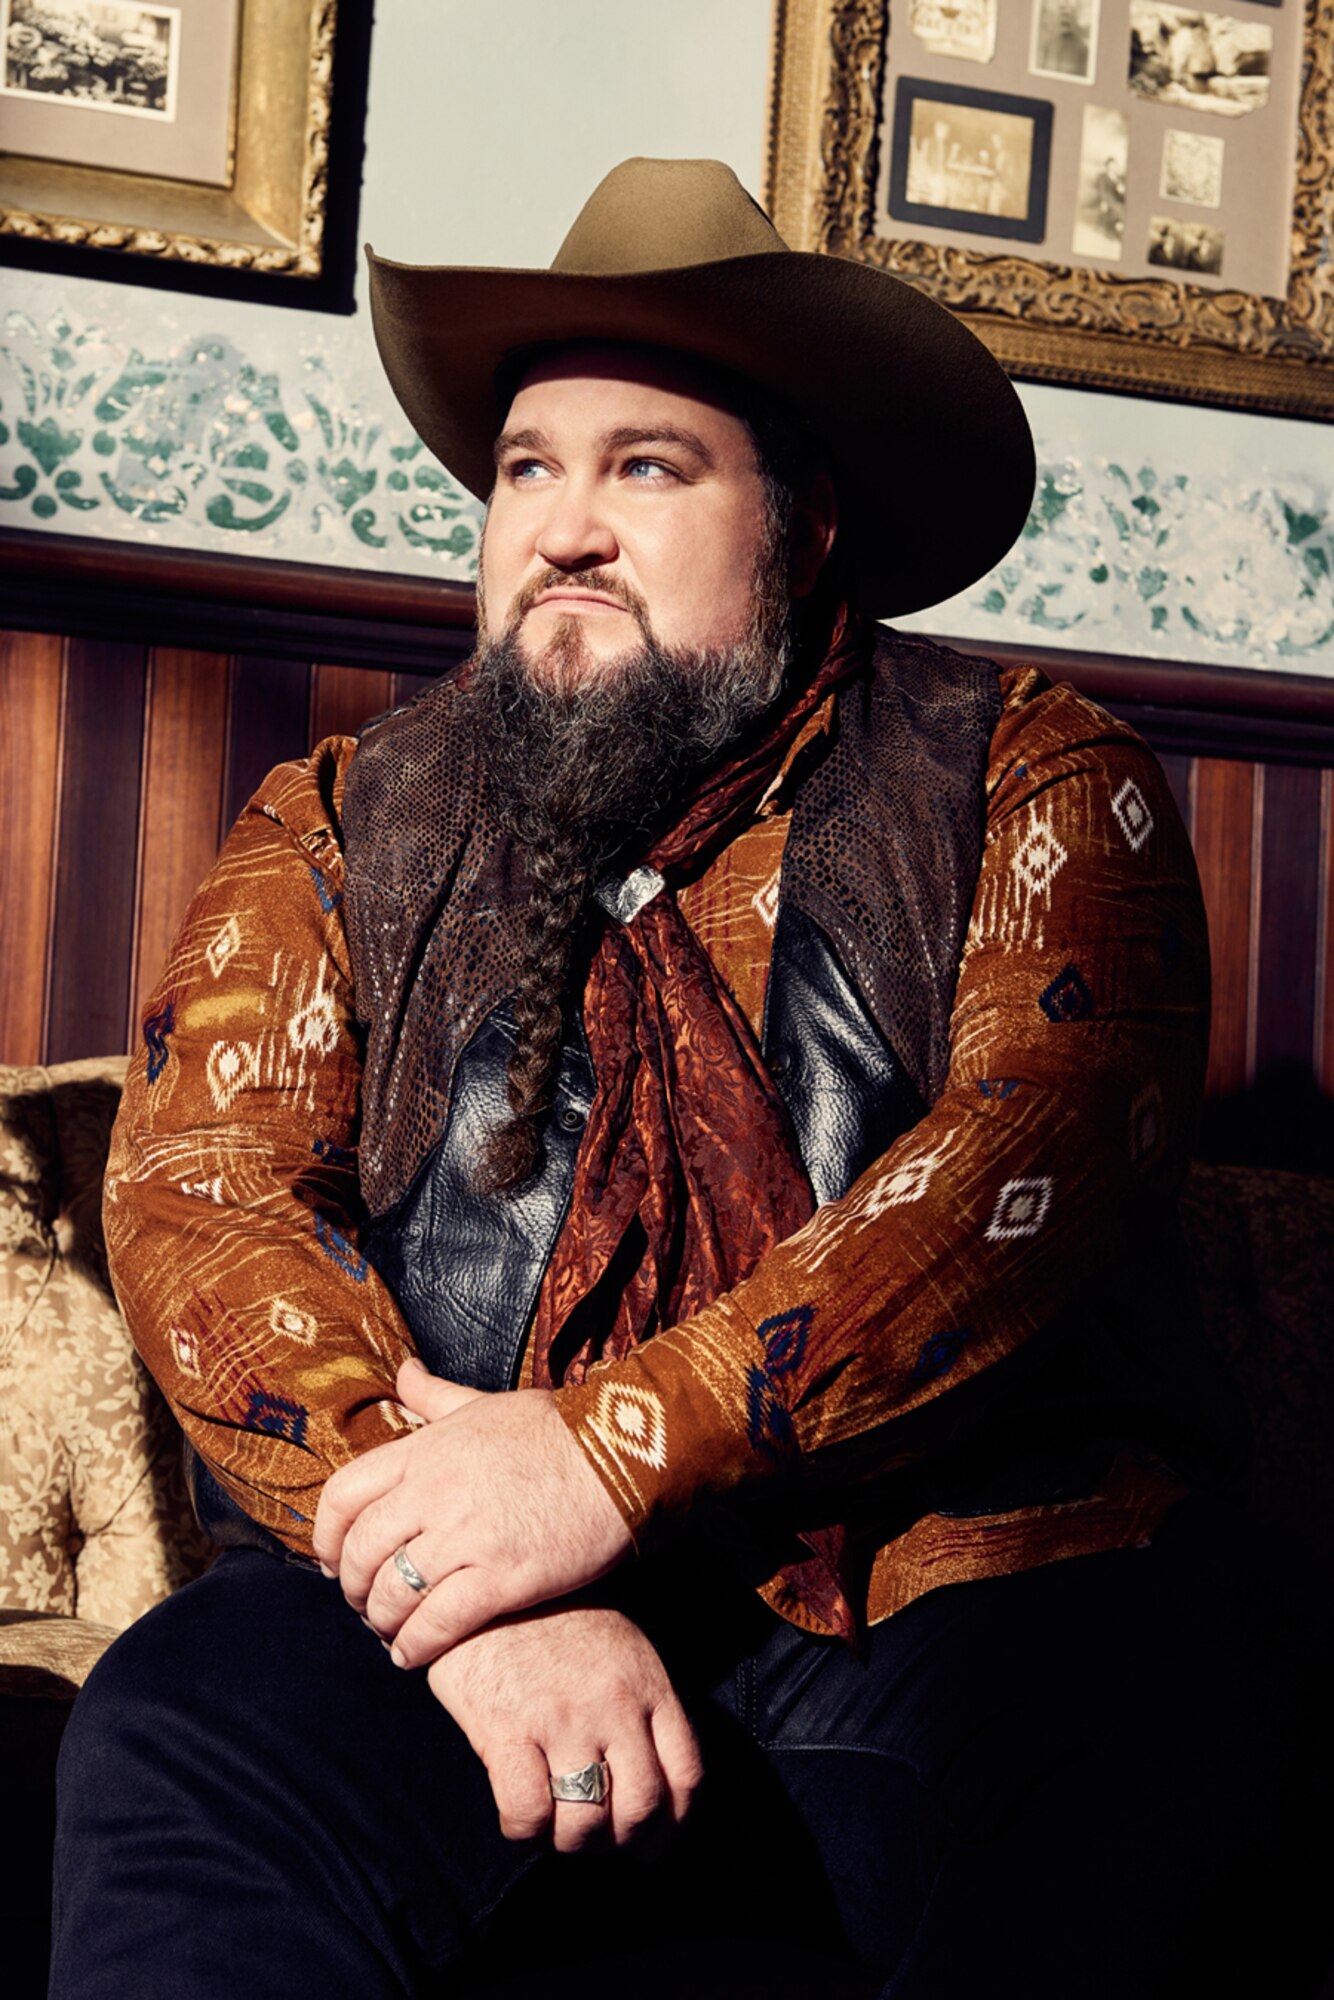 Sundance Head, winner of NBC-TV's "The Voice" in December 2016, has been touring with his singing contest mentor and country music star Blake Shelton. Head says he is eager to meet Airmen to thank them personally for their service. (Meredith Truax courtesy photo)